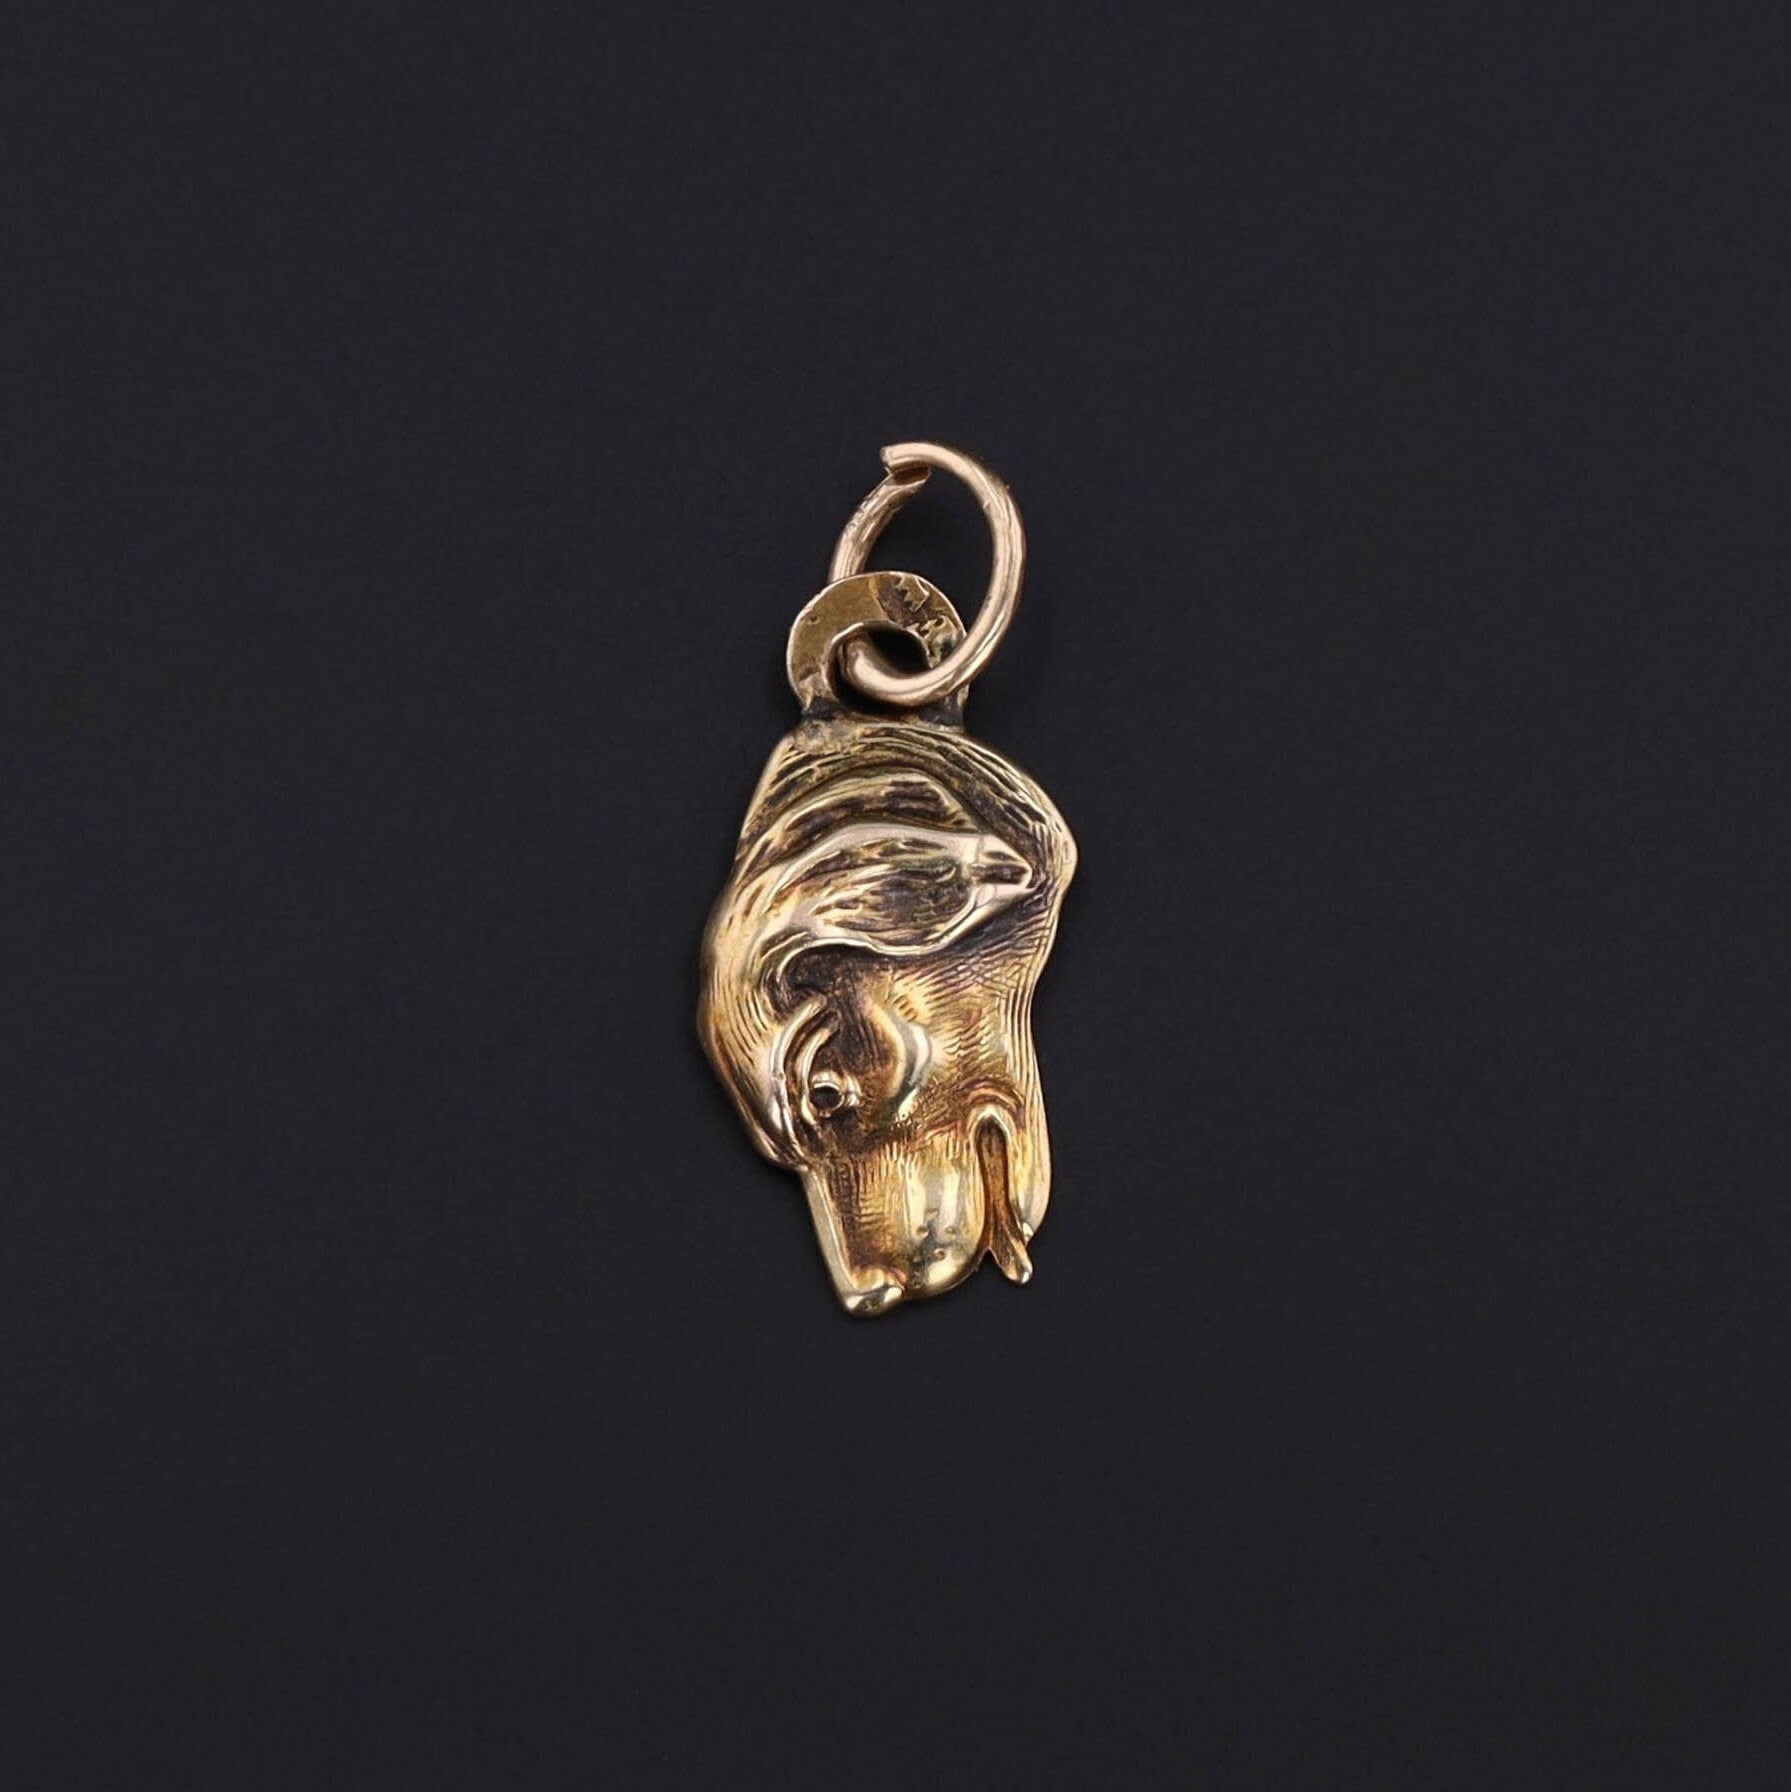 Antique Hunting or Hound Dog Charm of 14k Gold